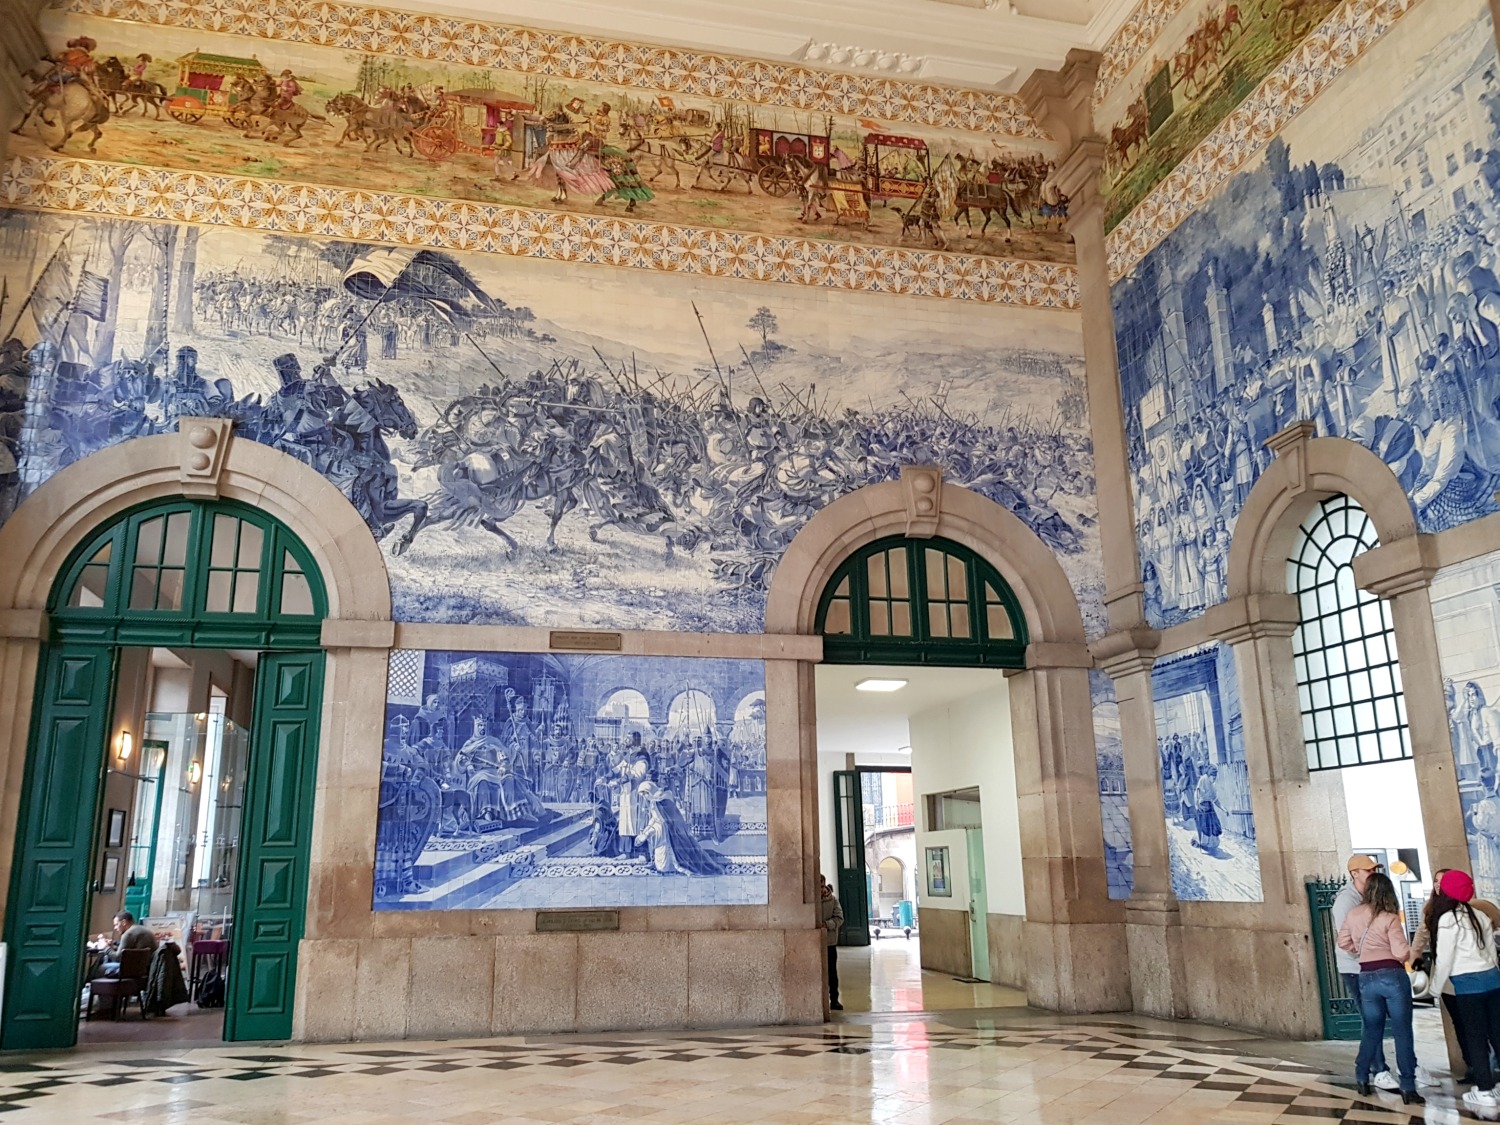 Intricate hand-painted tiles in Sao Bento train station in Porto - a visit is one of the unmissable things to do in Porto with kdis